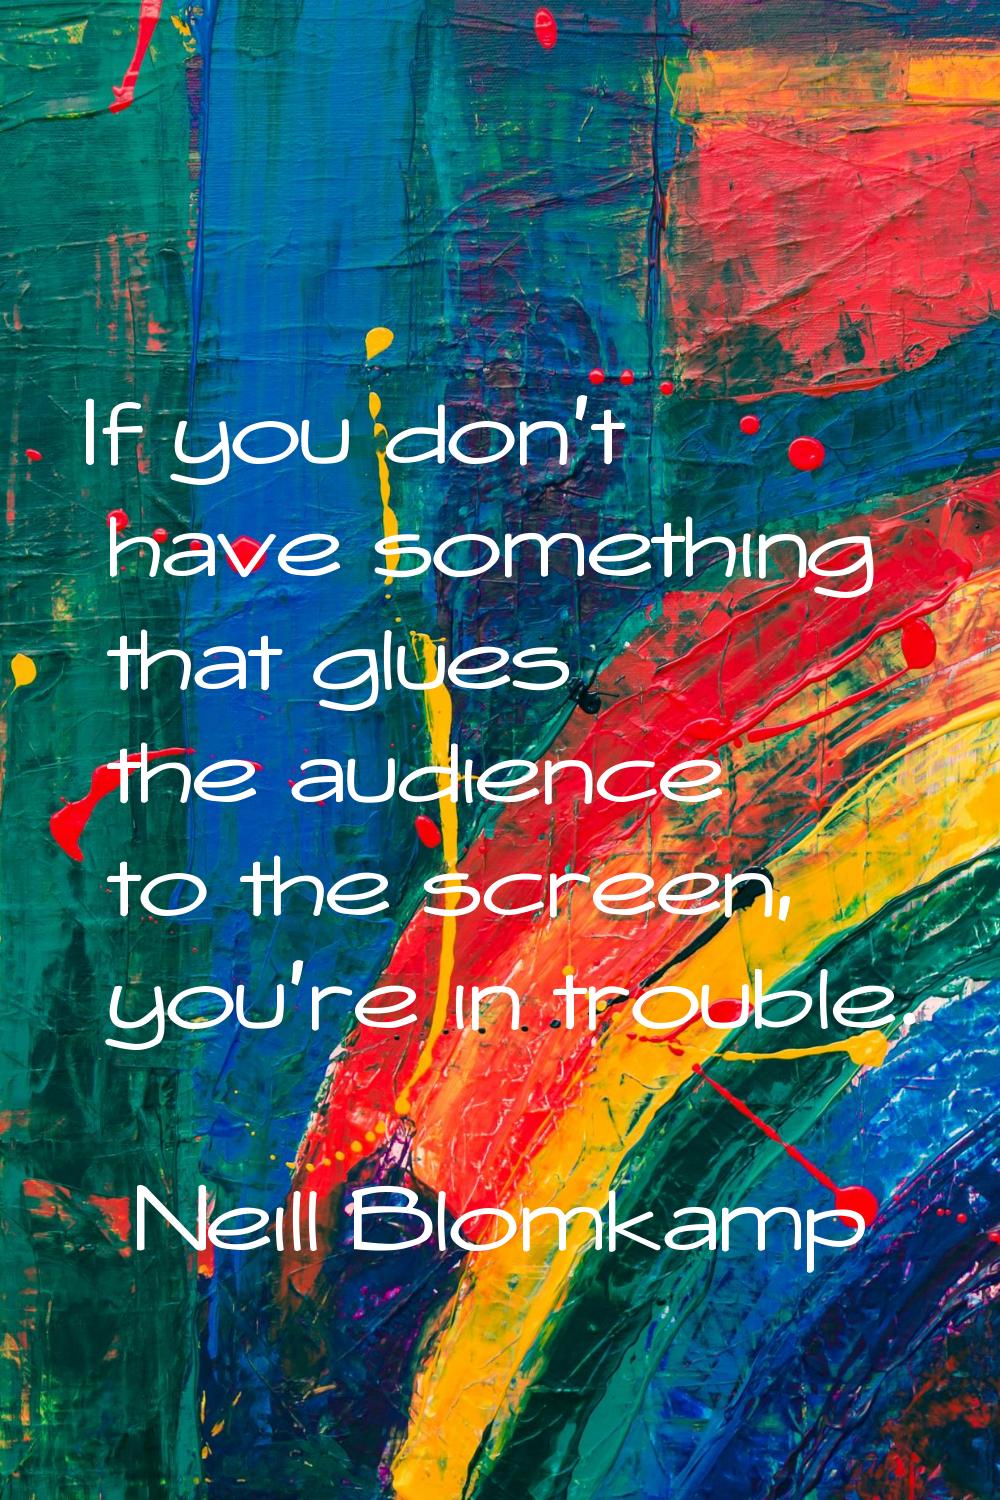 If you don't have something that glues the audience to the screen, you're in trouble.